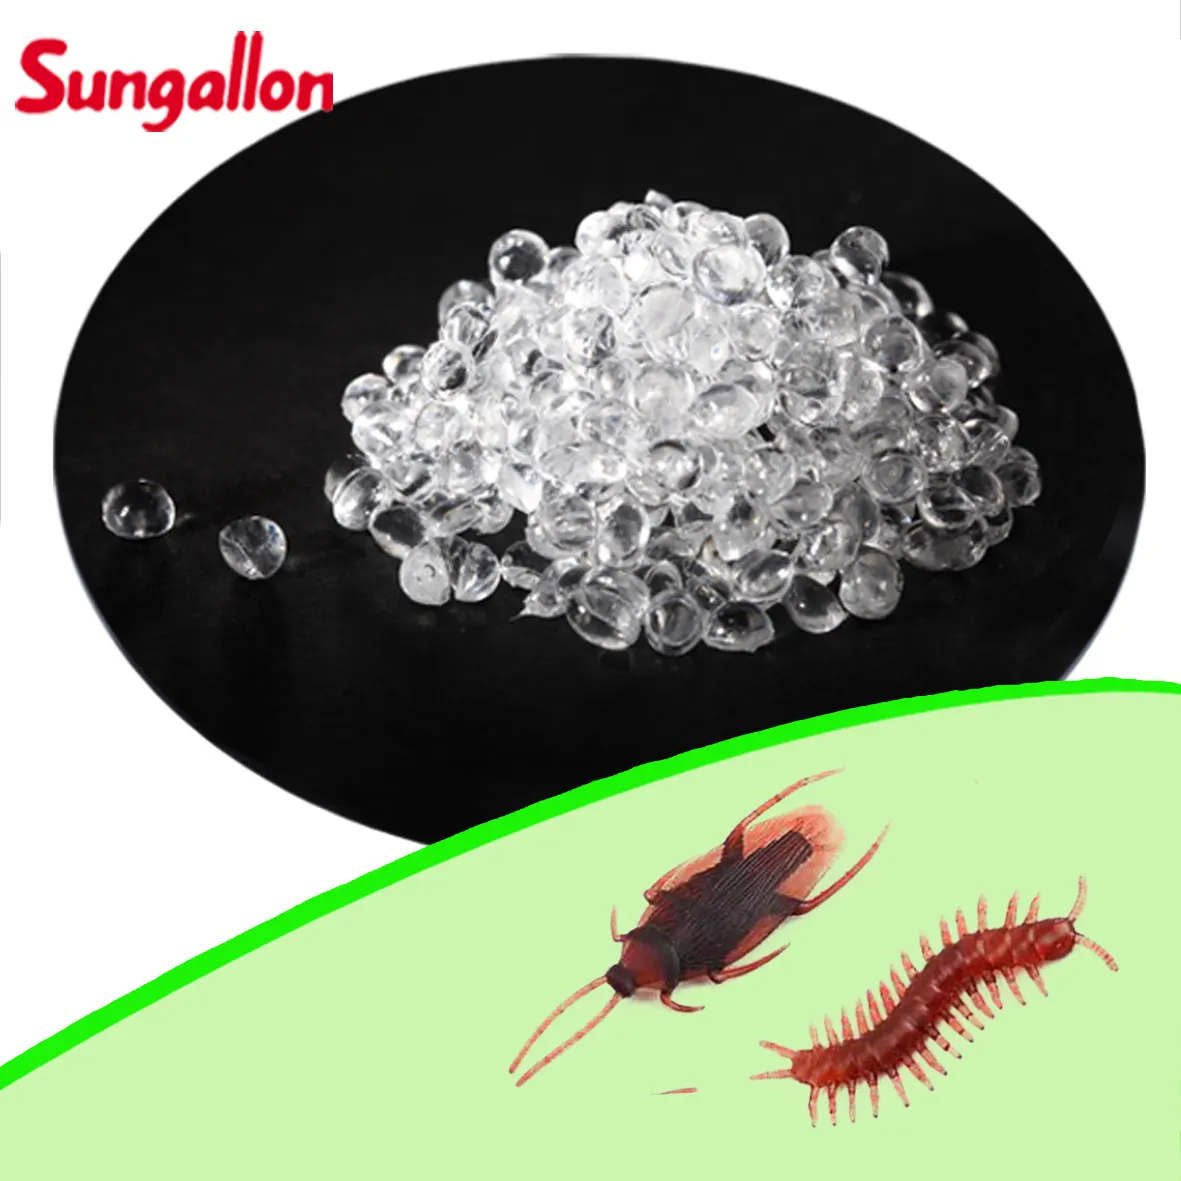 Sungallon GP100-3001 series thermoplastic elastomer TPE raw material is used to make super transparent particles for toys